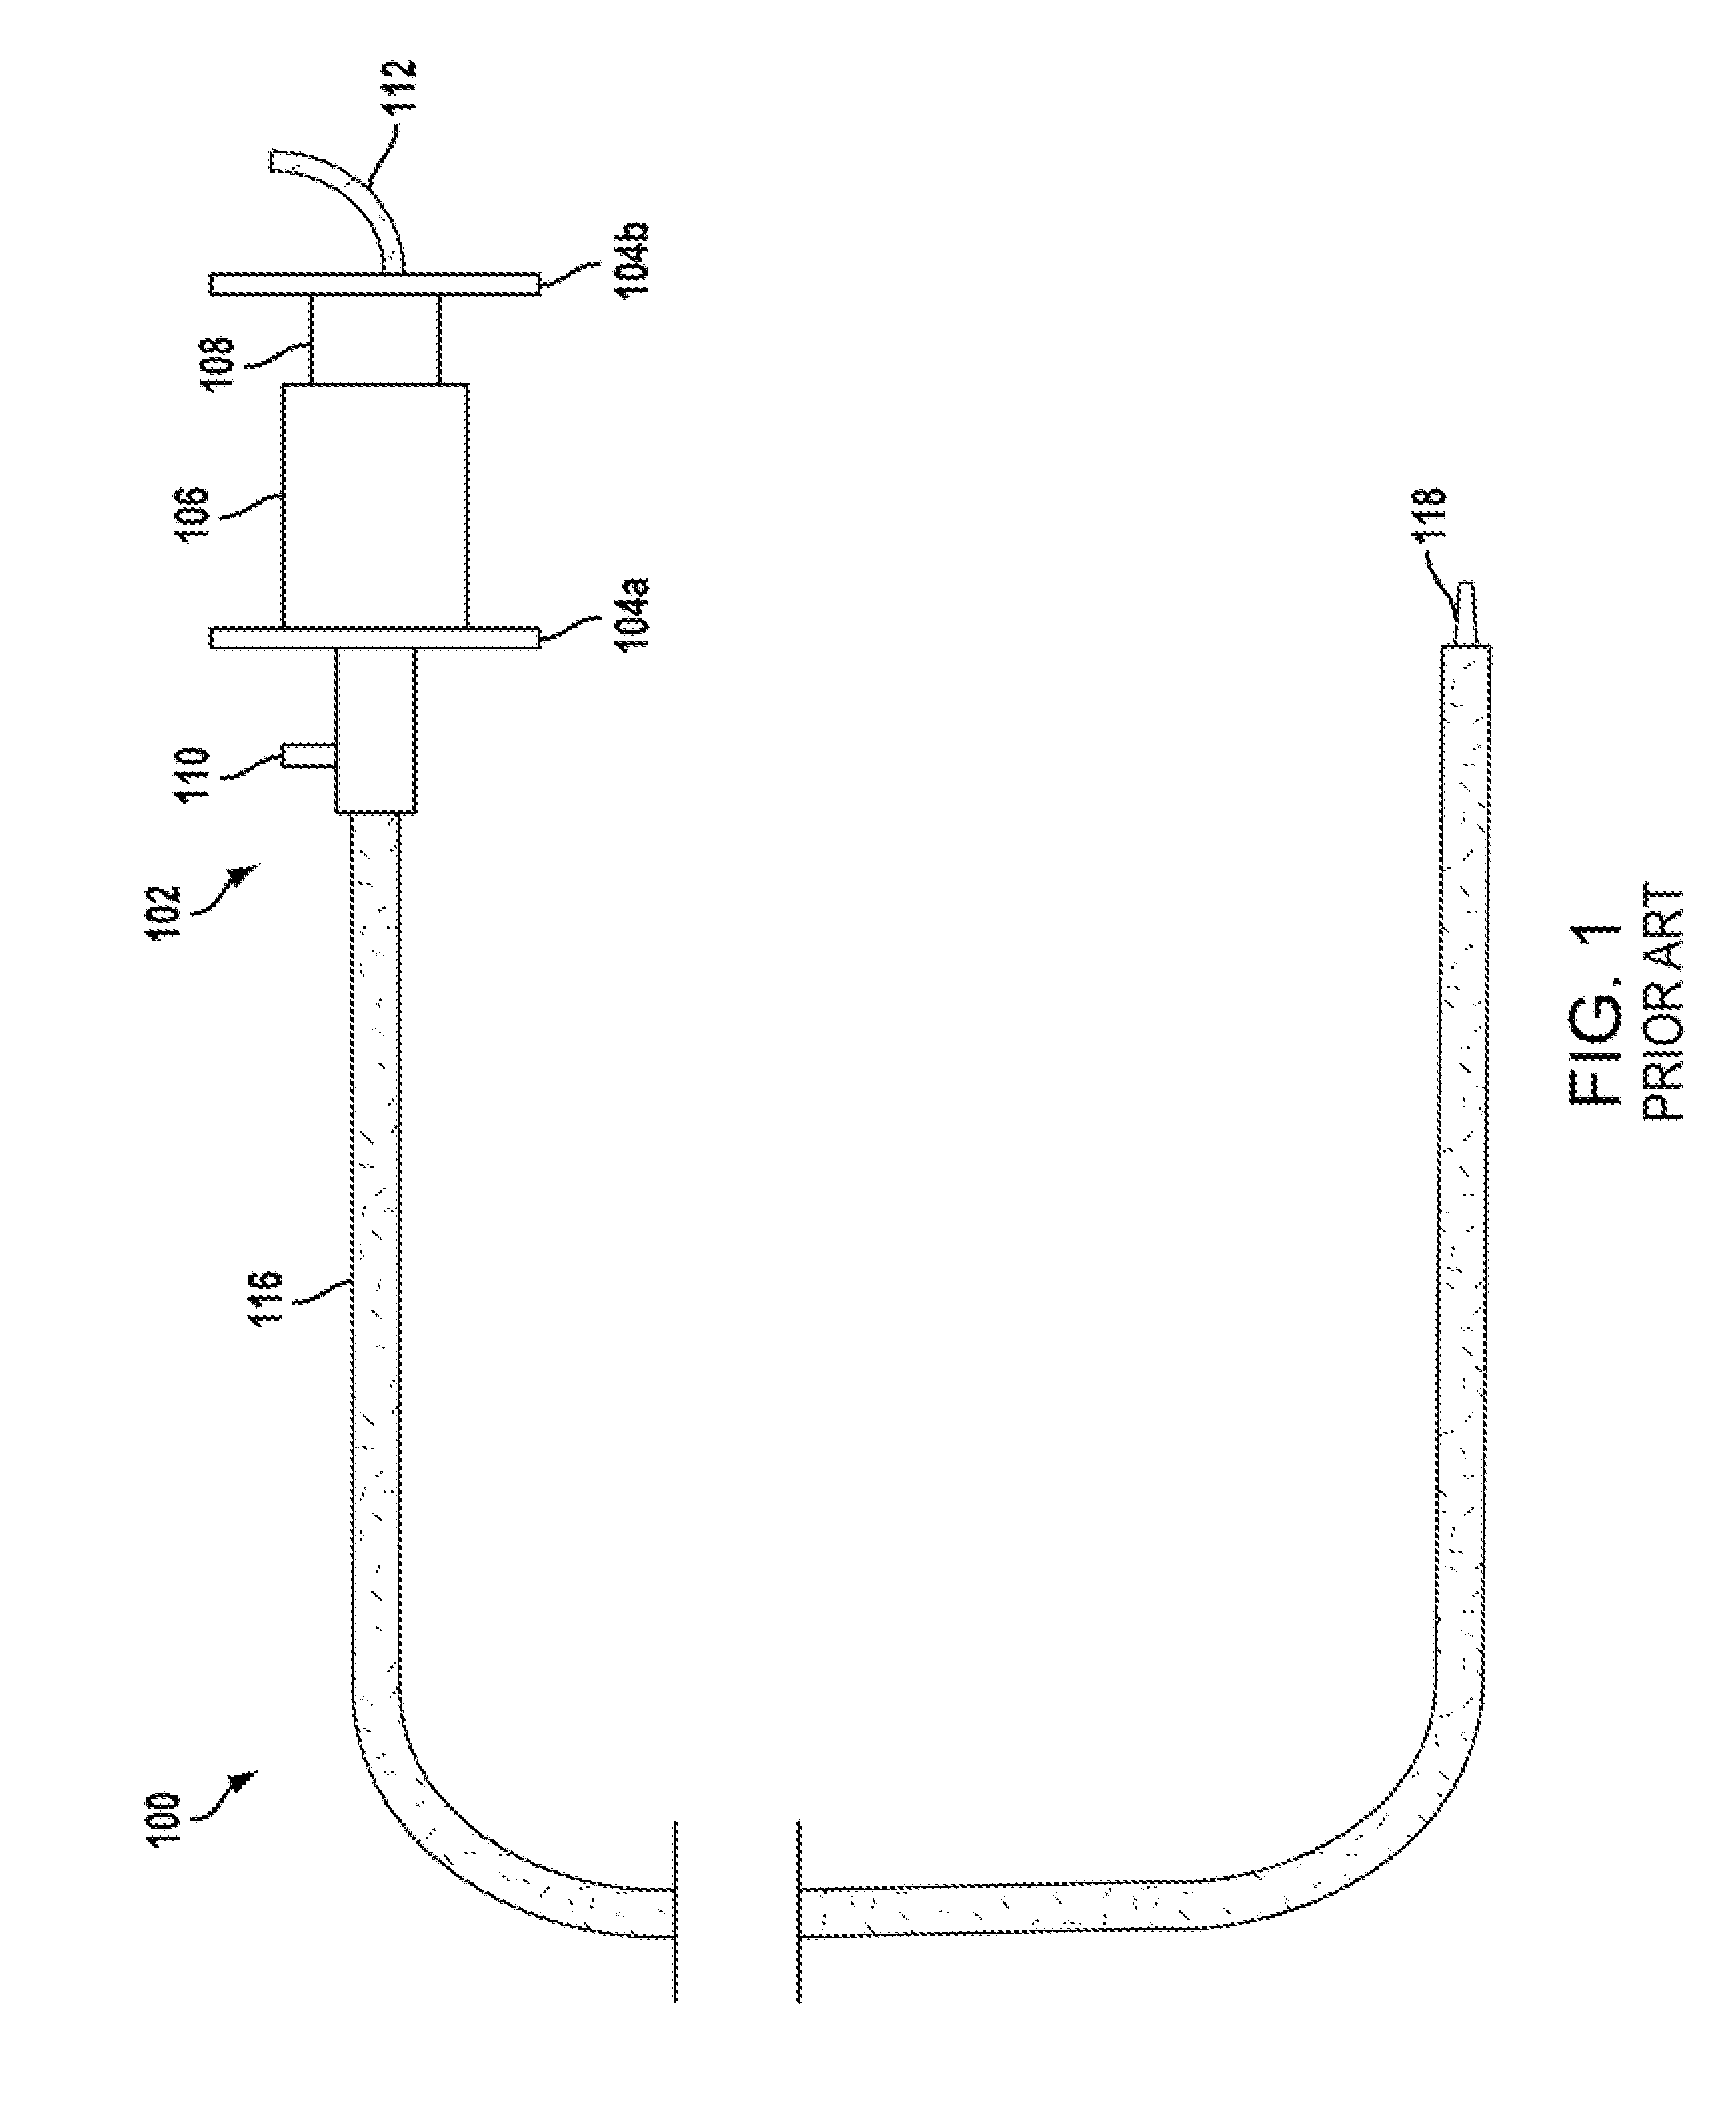 Components for multiple axis control of a catheter in a catheter positioning system